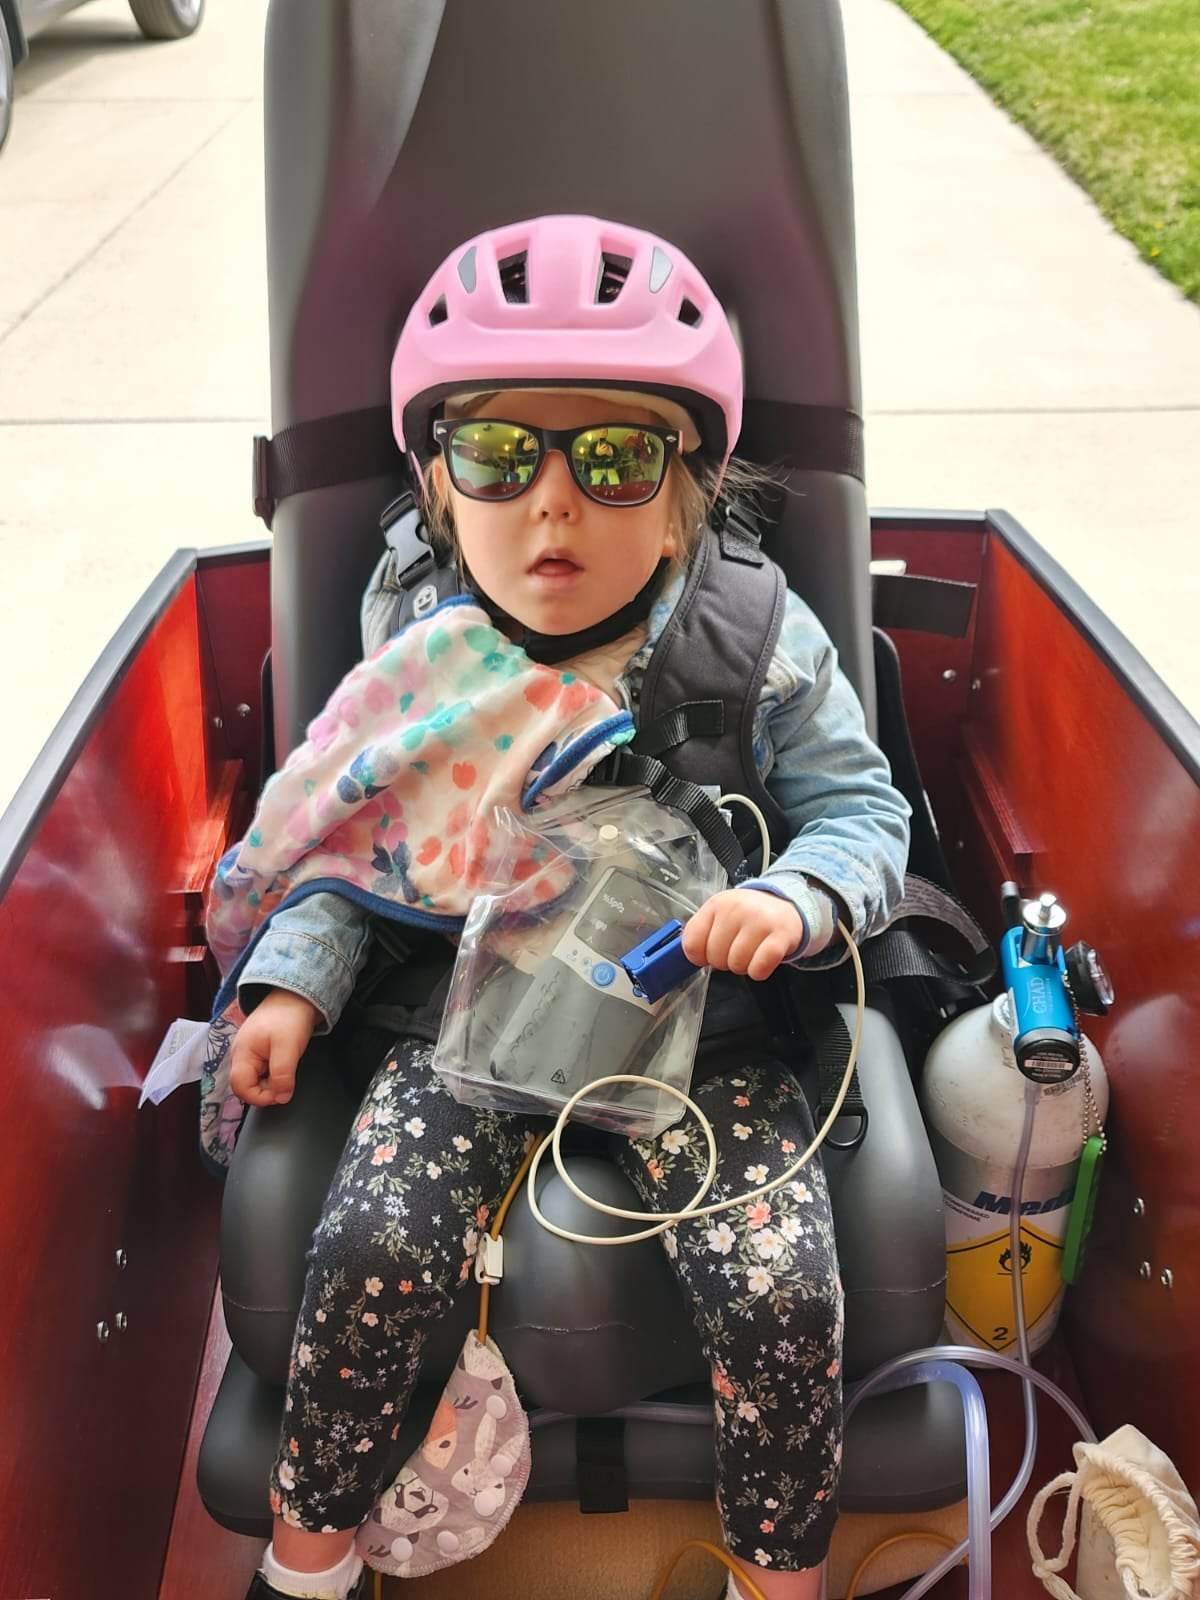 Little girl with medical support equipment and oxygen tank riding in an ebike to school